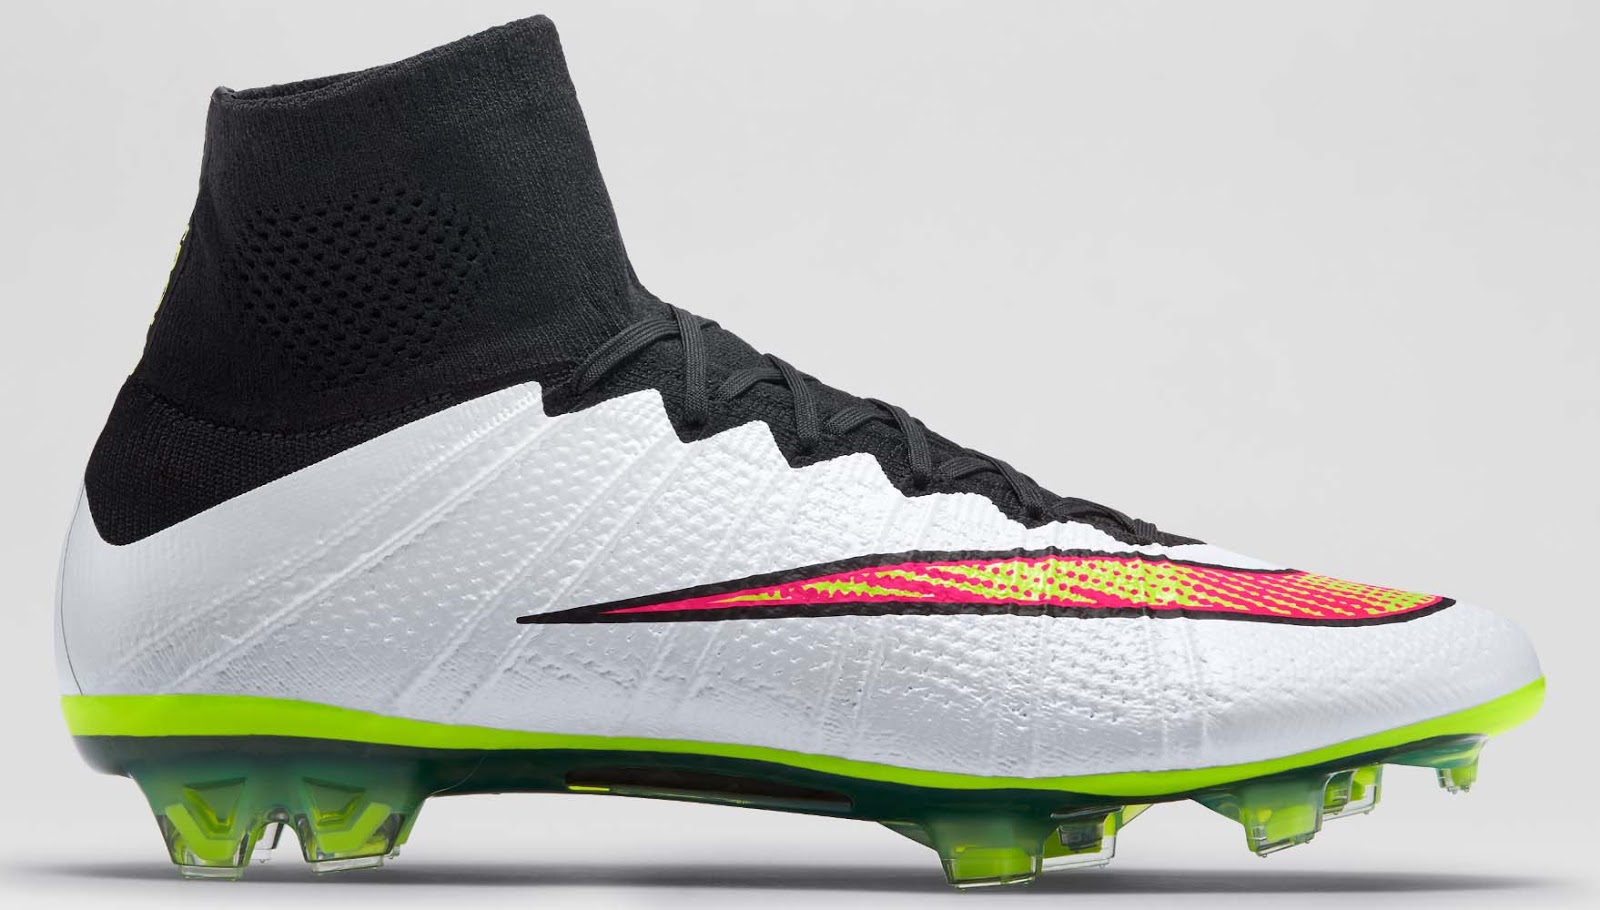   is the new white Nike Mercurial Superfly 4 2014 2015 Soccer Cleat  football boot calendar 2015